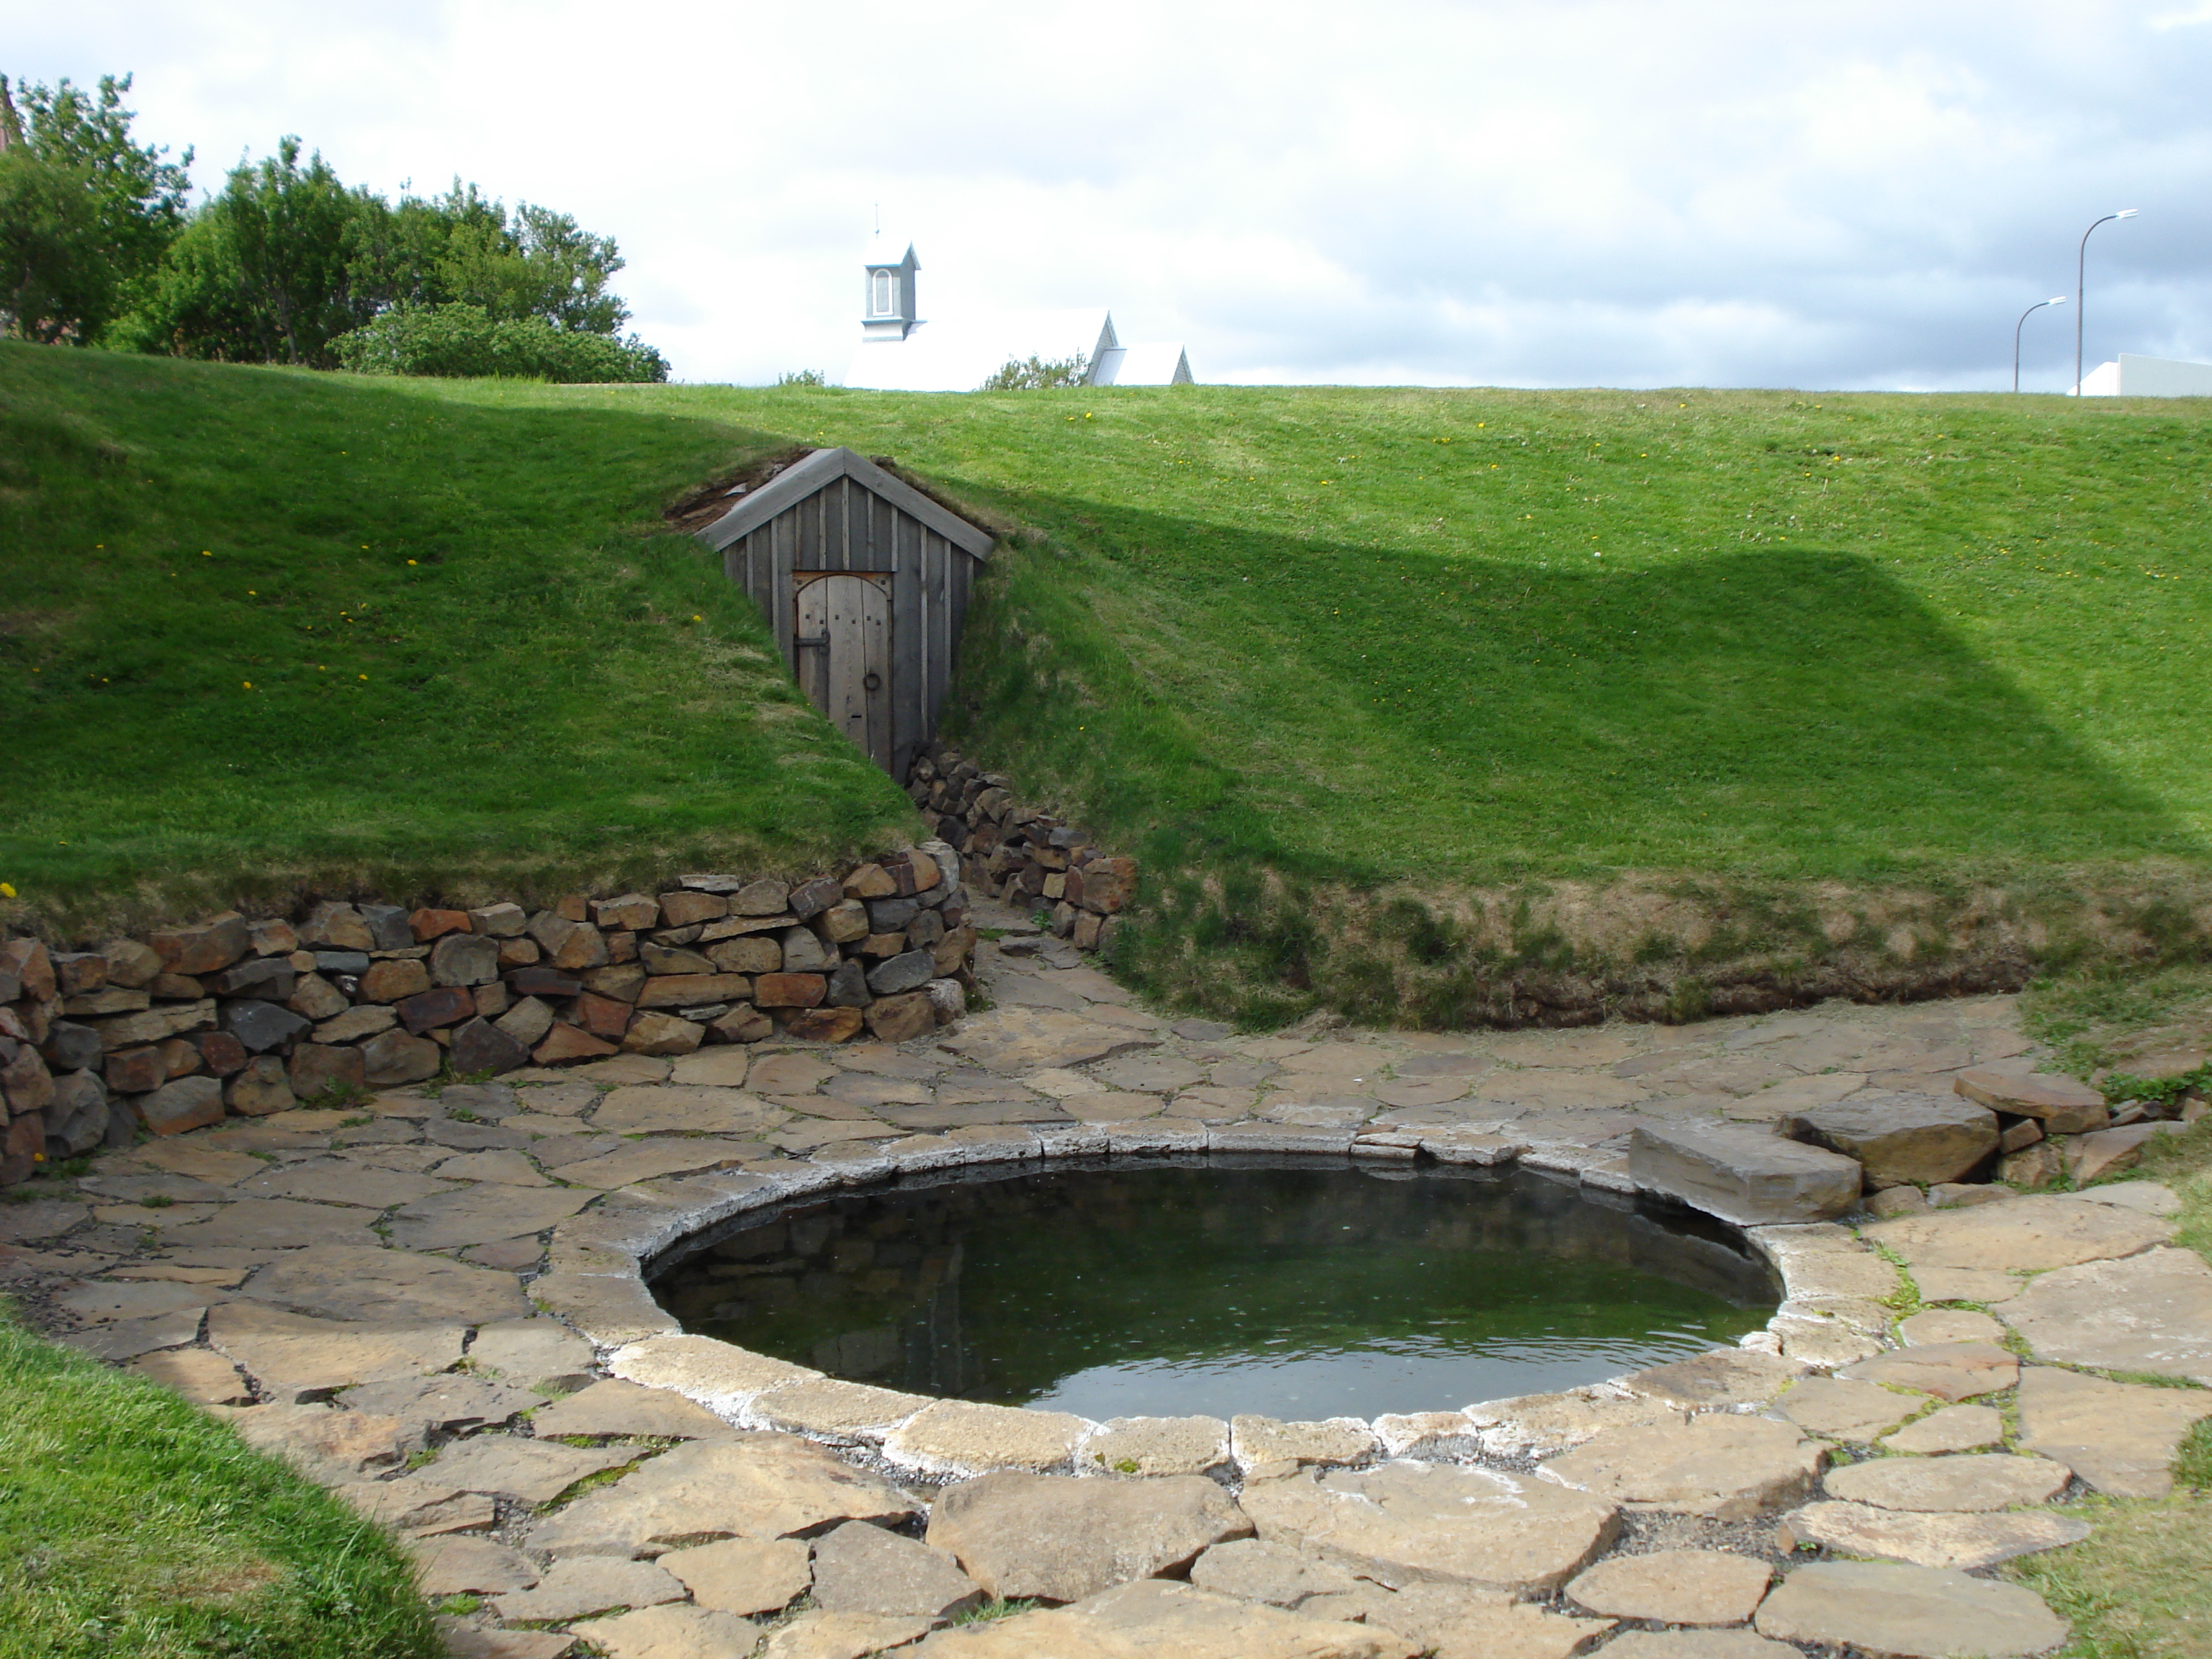 A round pool made of rocks in front of a sod house.